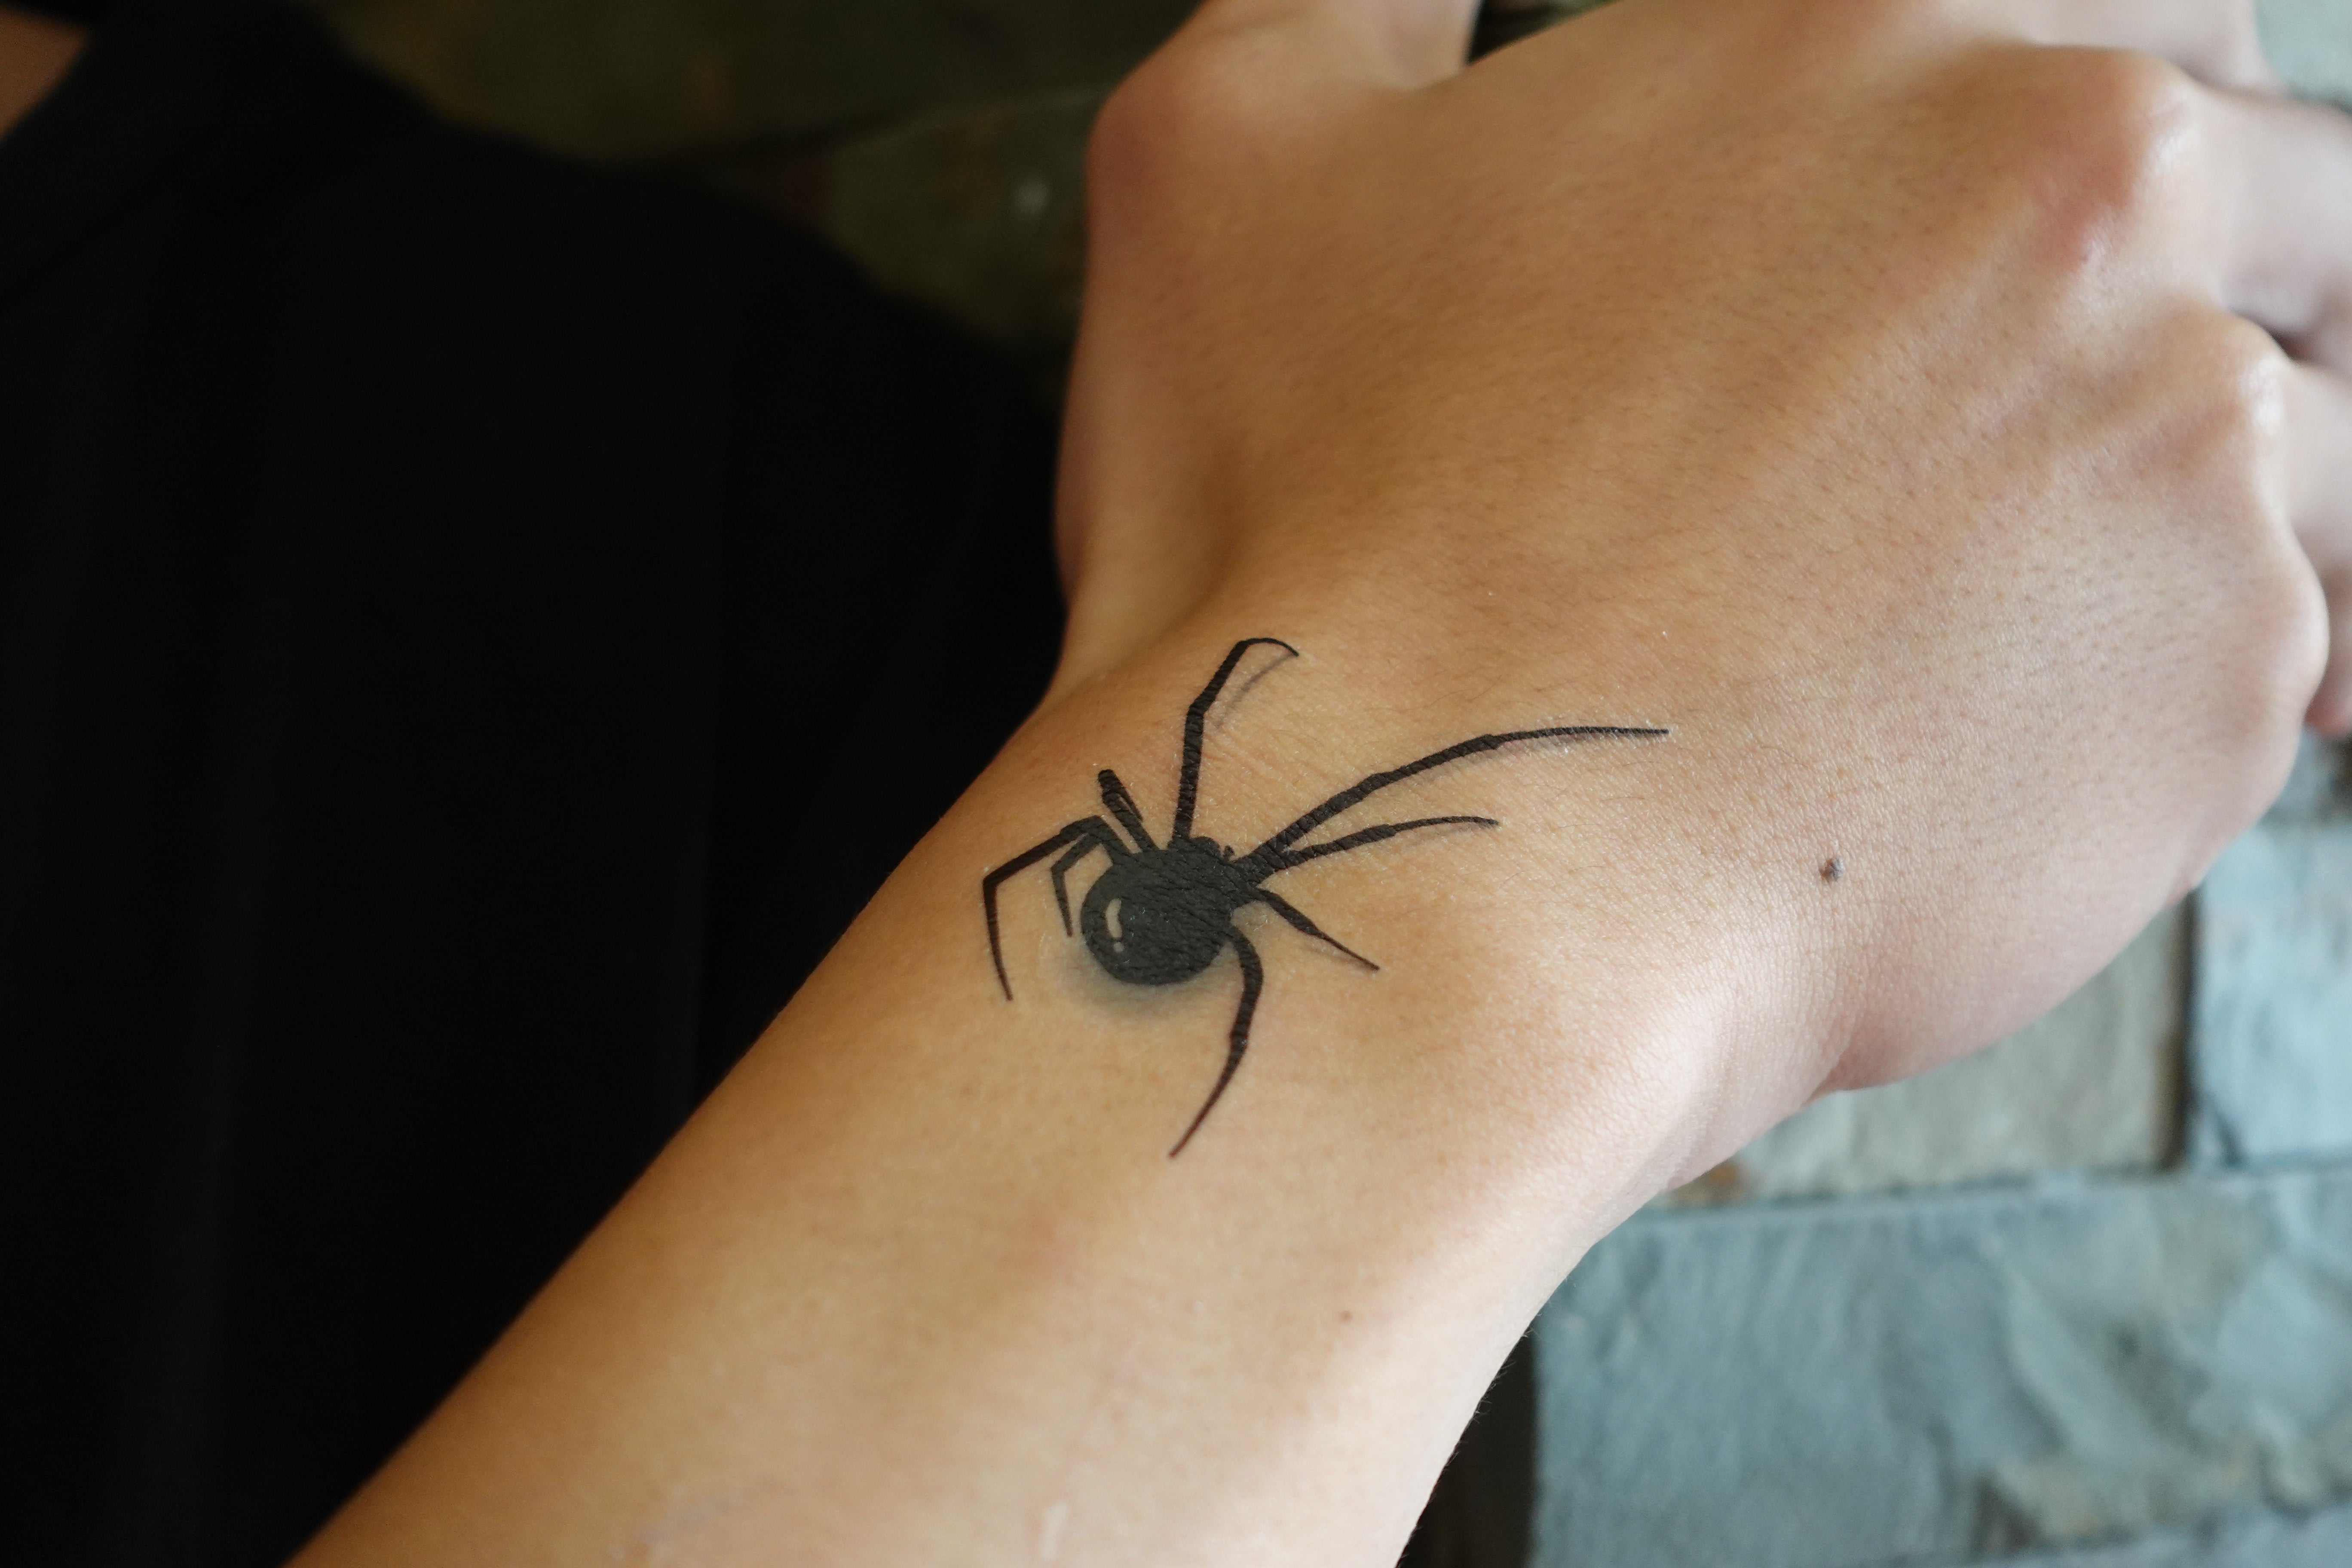 101 Best Small Spider Tattoo Ideas That Will Blow Your Mind!